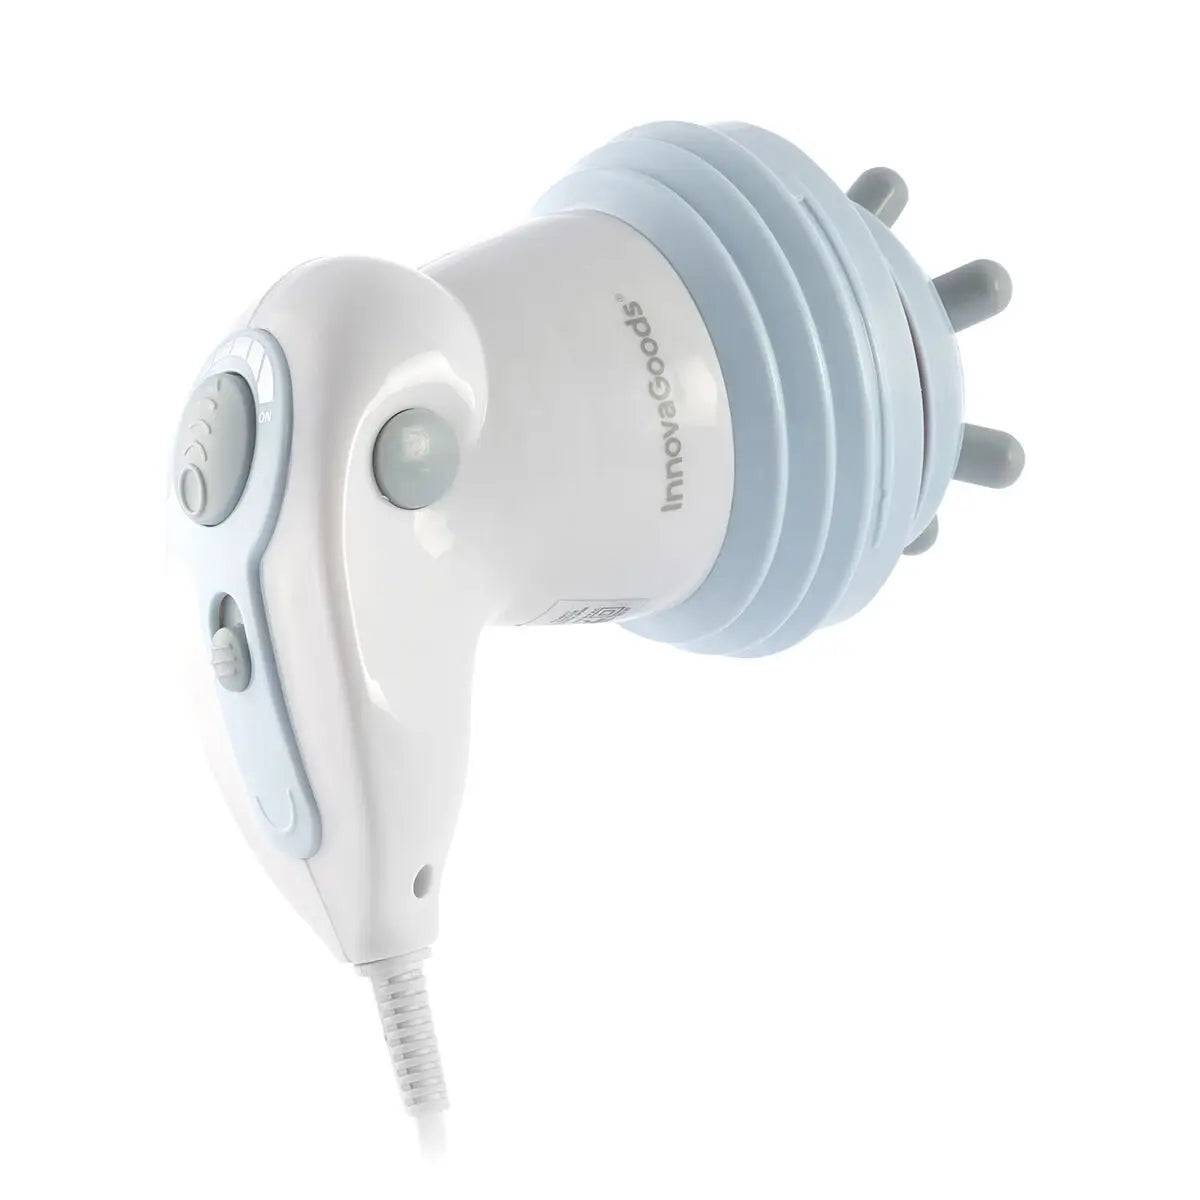 a close up of a hair dryer on a white background